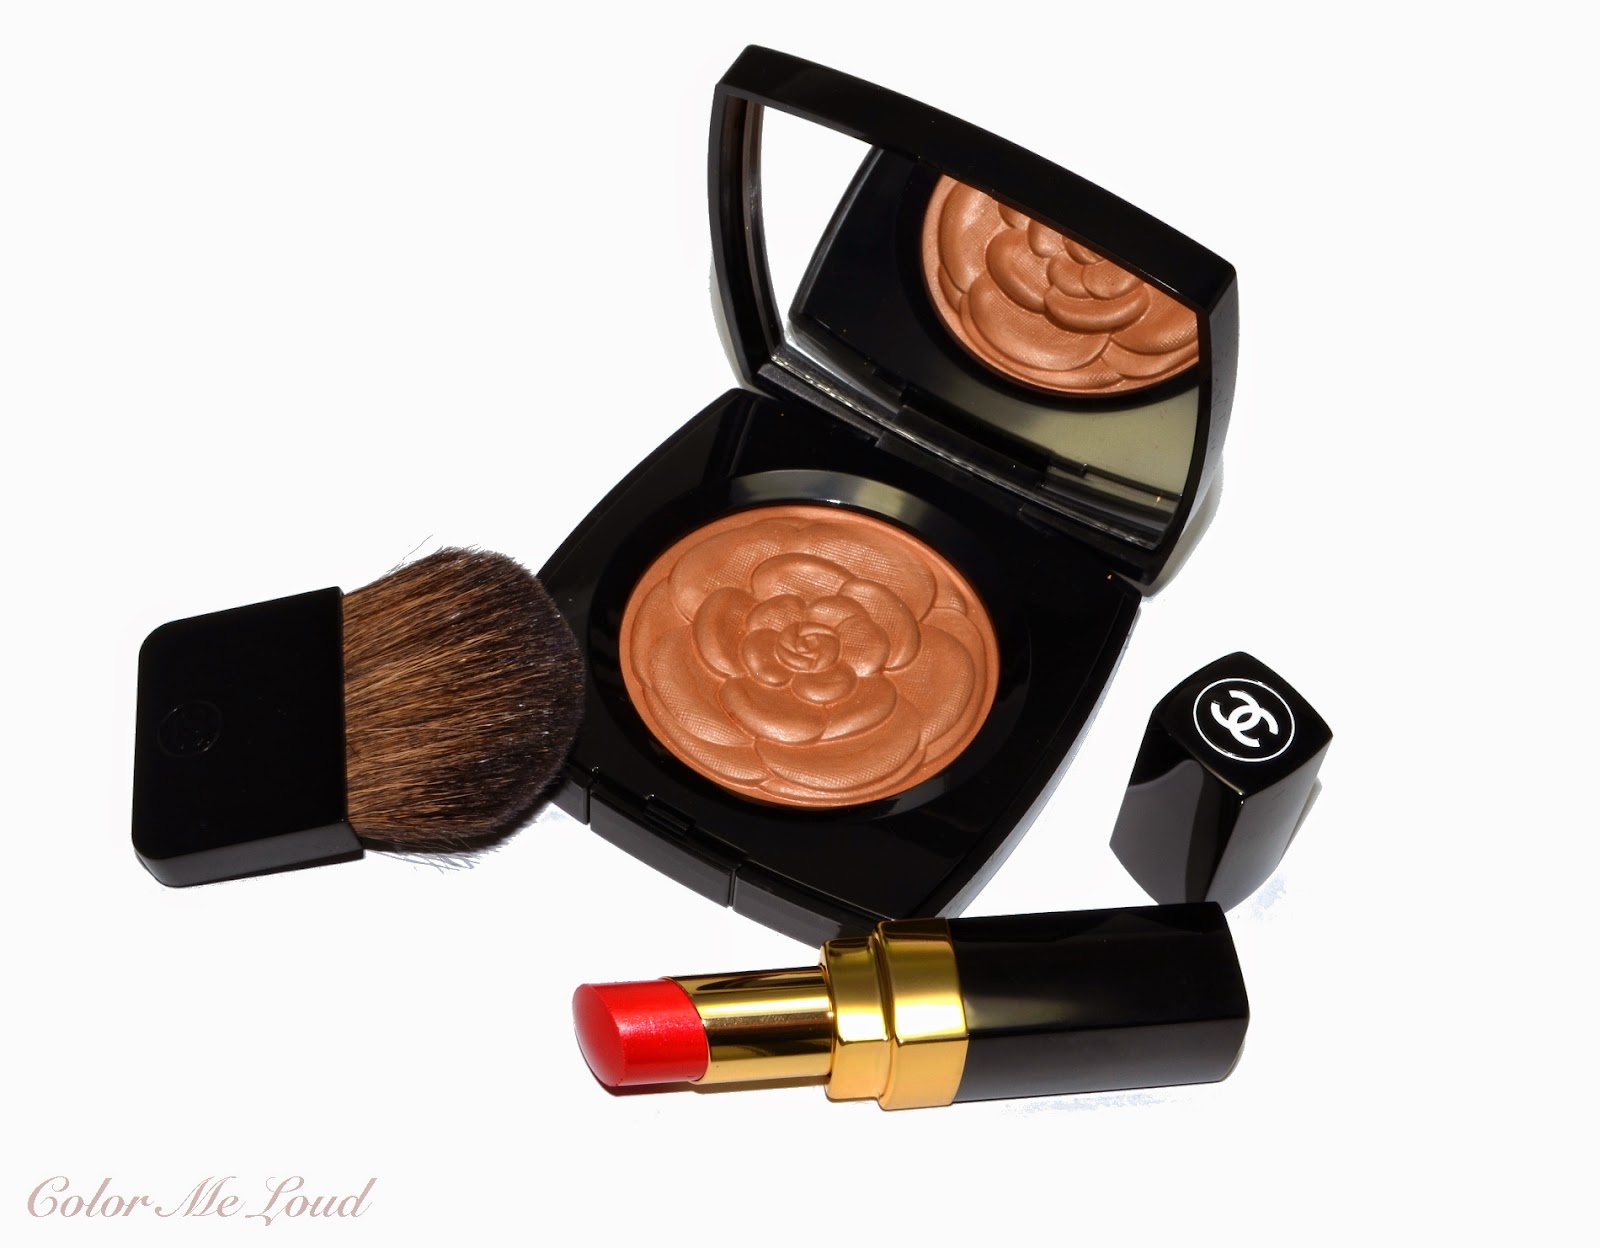 Chanel Lumiere D'Ete Illuminating Bronzer and Rouge Coco Shine #507 Insoumise, Review, Swatch, Comparison & FOTD